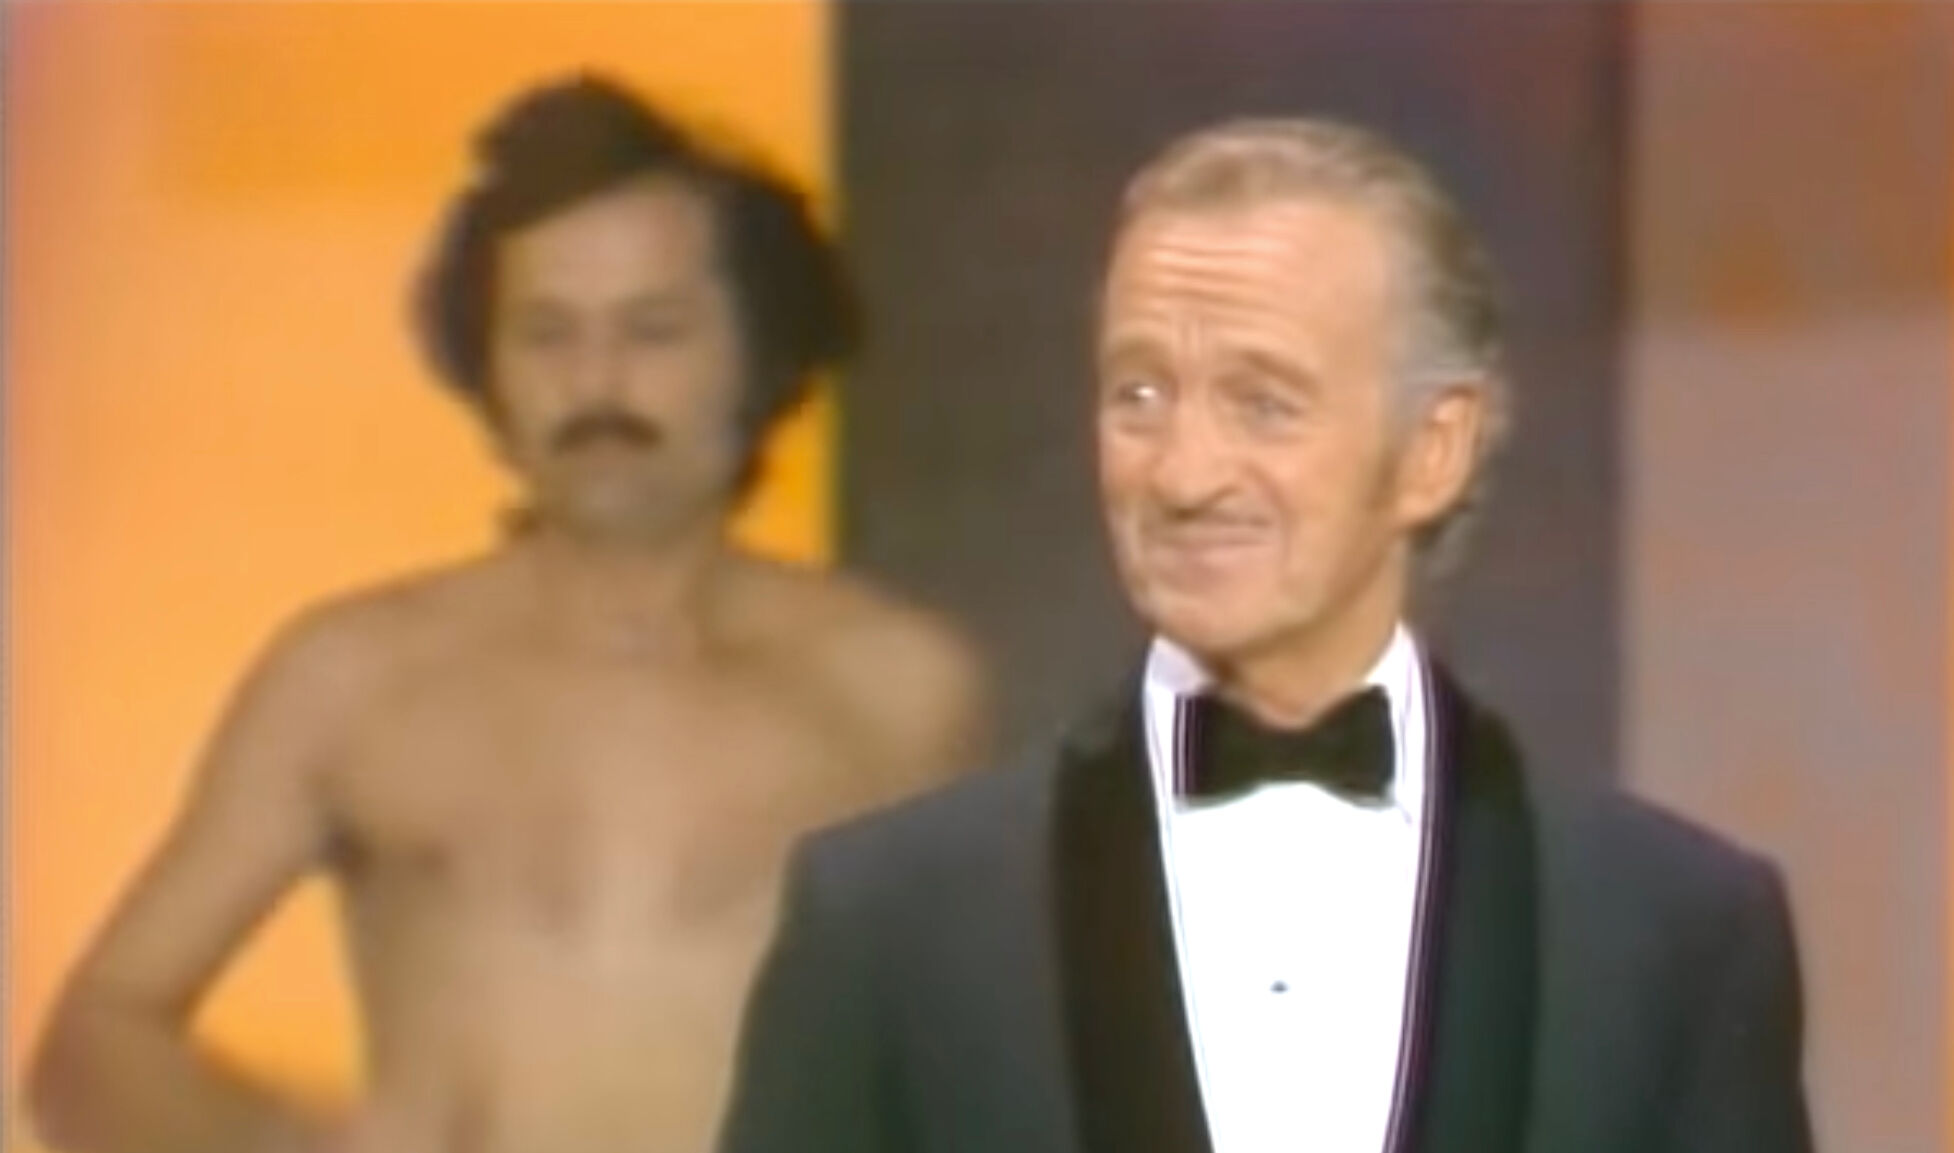 He streaked at the Oscars &#038; ran for President. The wild story of a 70s gay radical